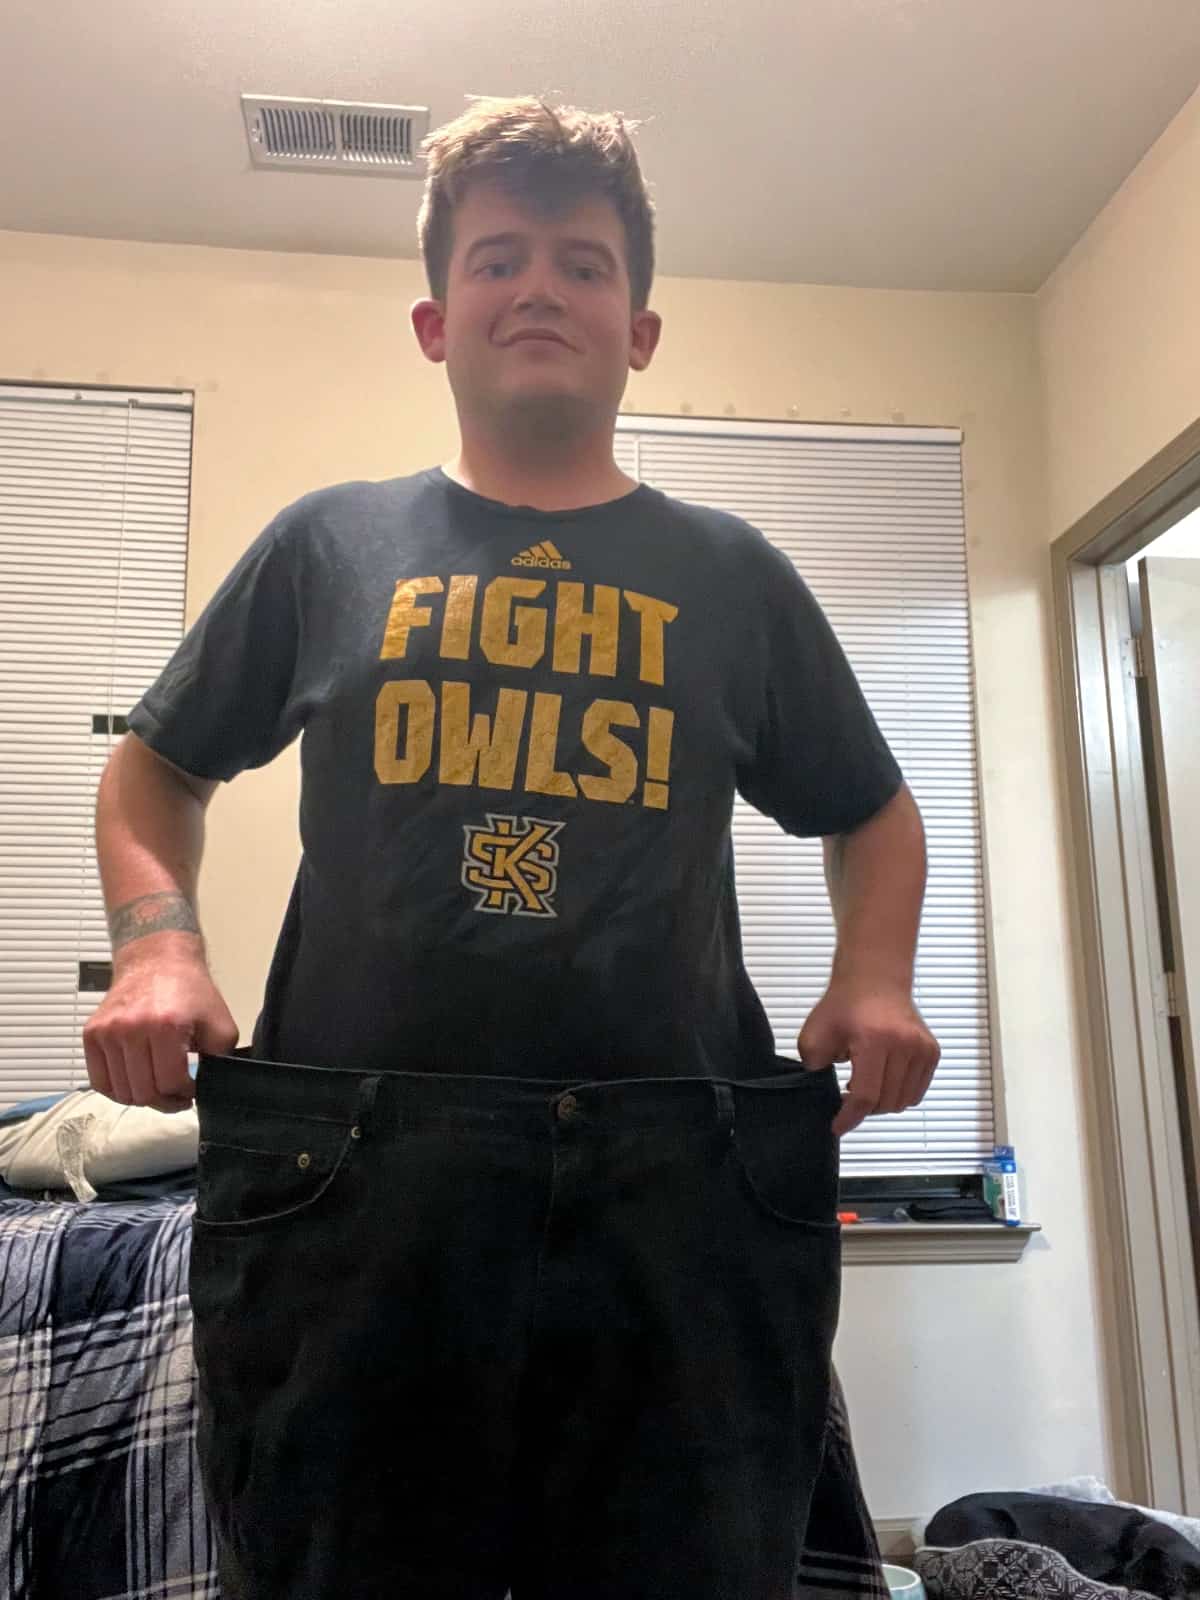 Matthew wearing pants that are now too large due to weight loss.